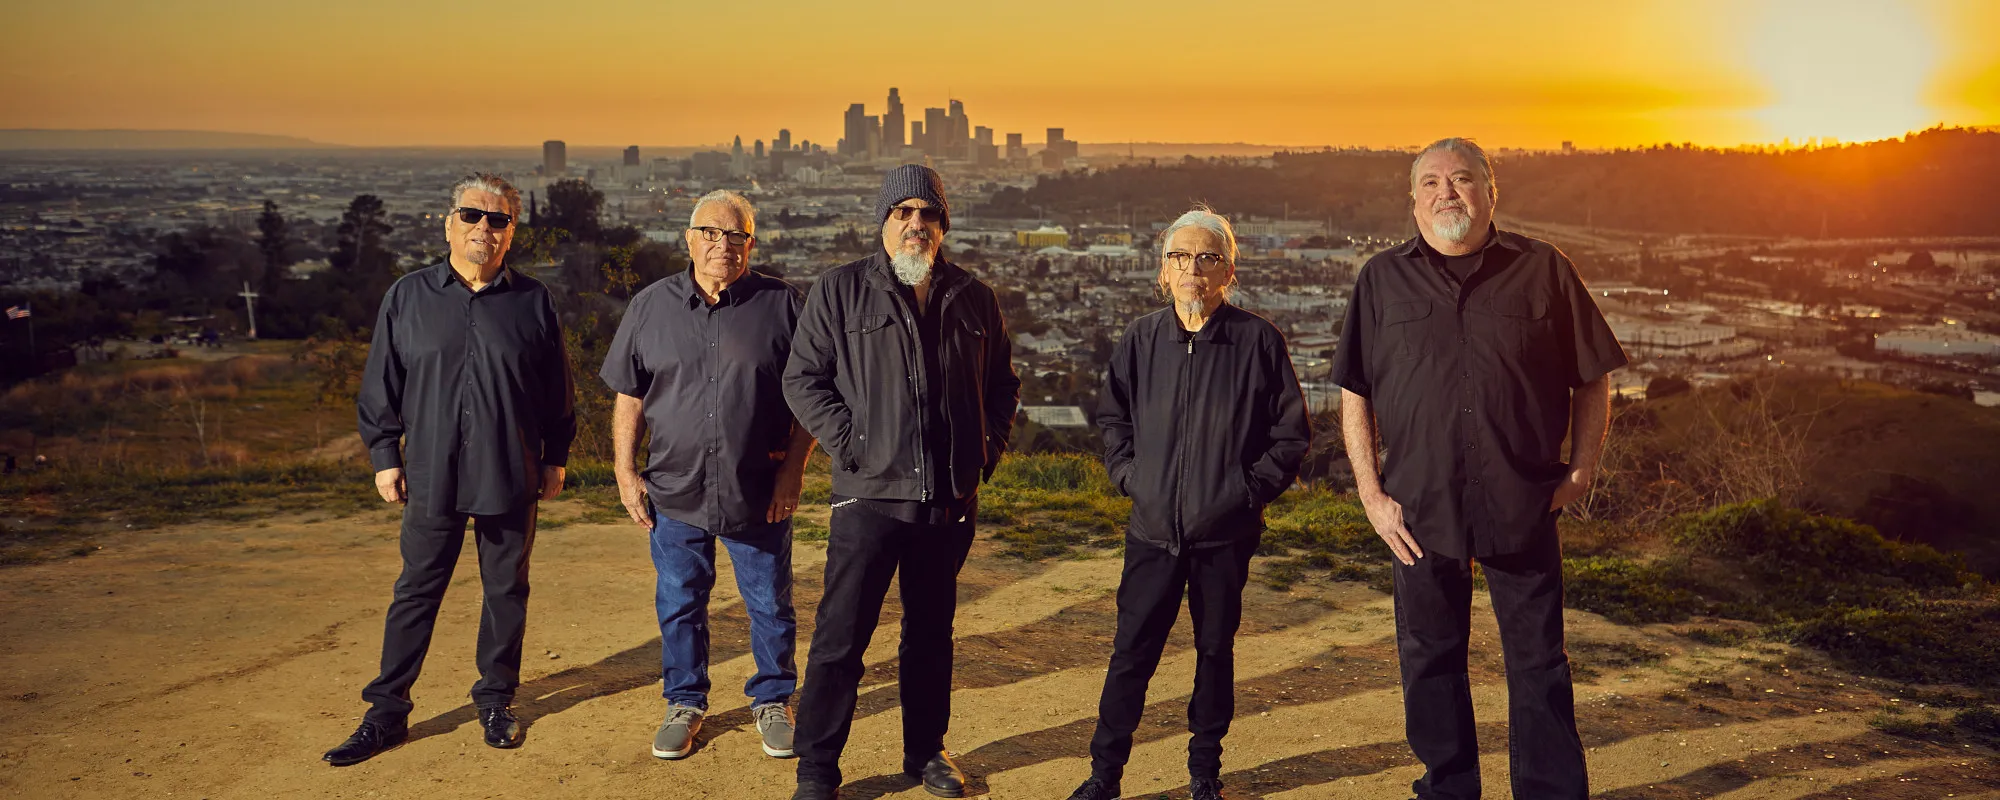 Review: Los Lobos Reveal Some Of Their Eclectic Influences On ‘Rising Sons’ Rousing Covers